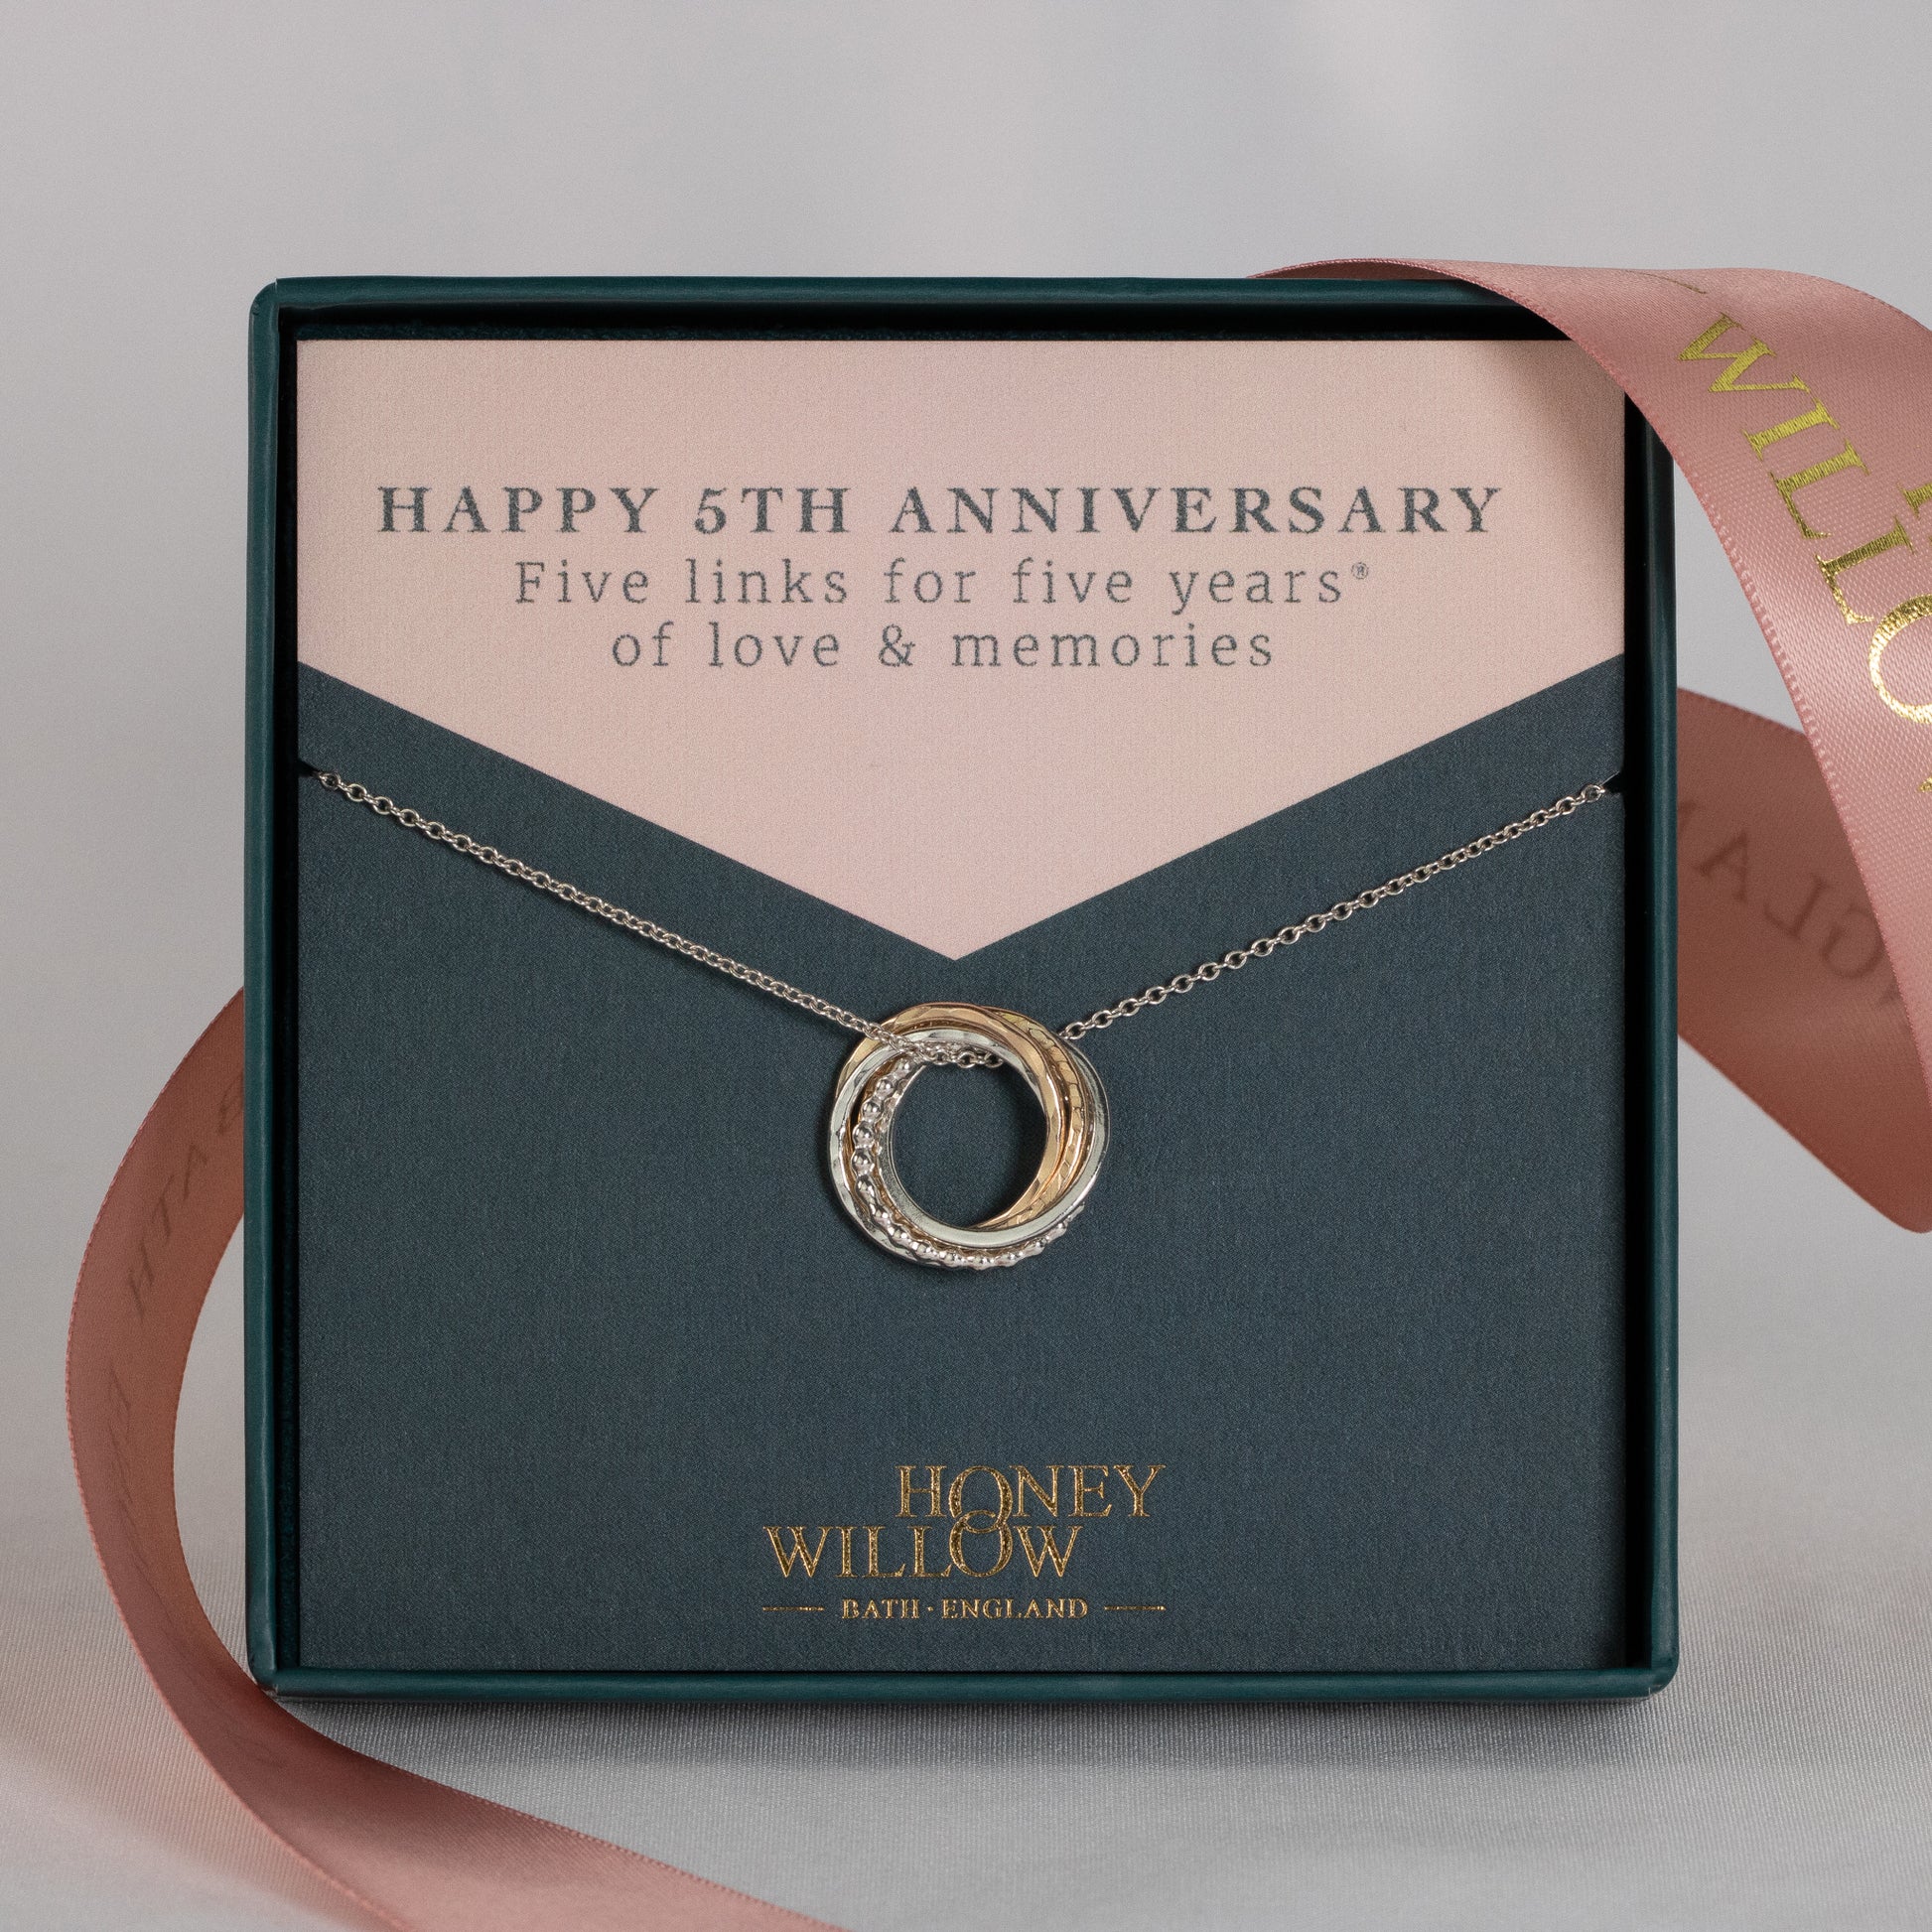 5th Anniversary Necklace - The Original 5 Rings for 5 Years Necklace - Petite Silver & Gold